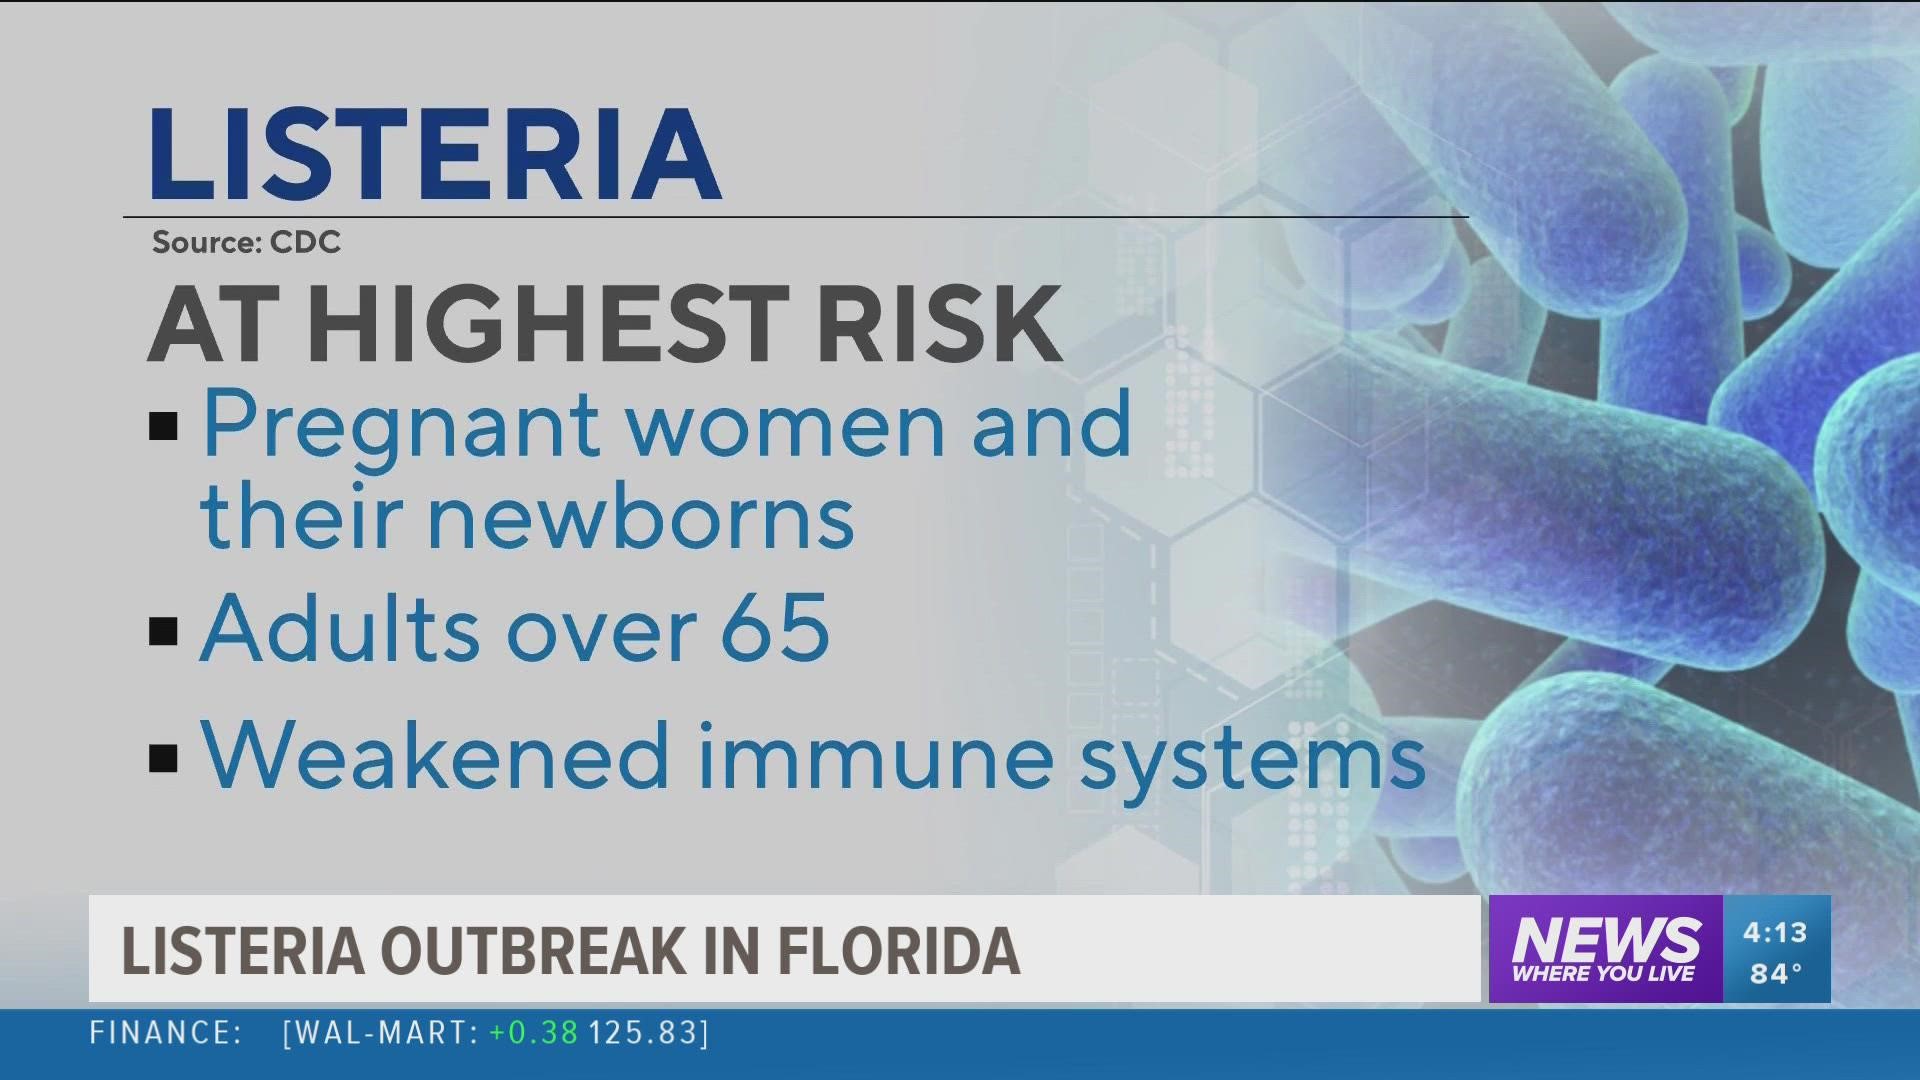 A listeria outbreak has been connected to several people who either live in or have visited Florida recently.